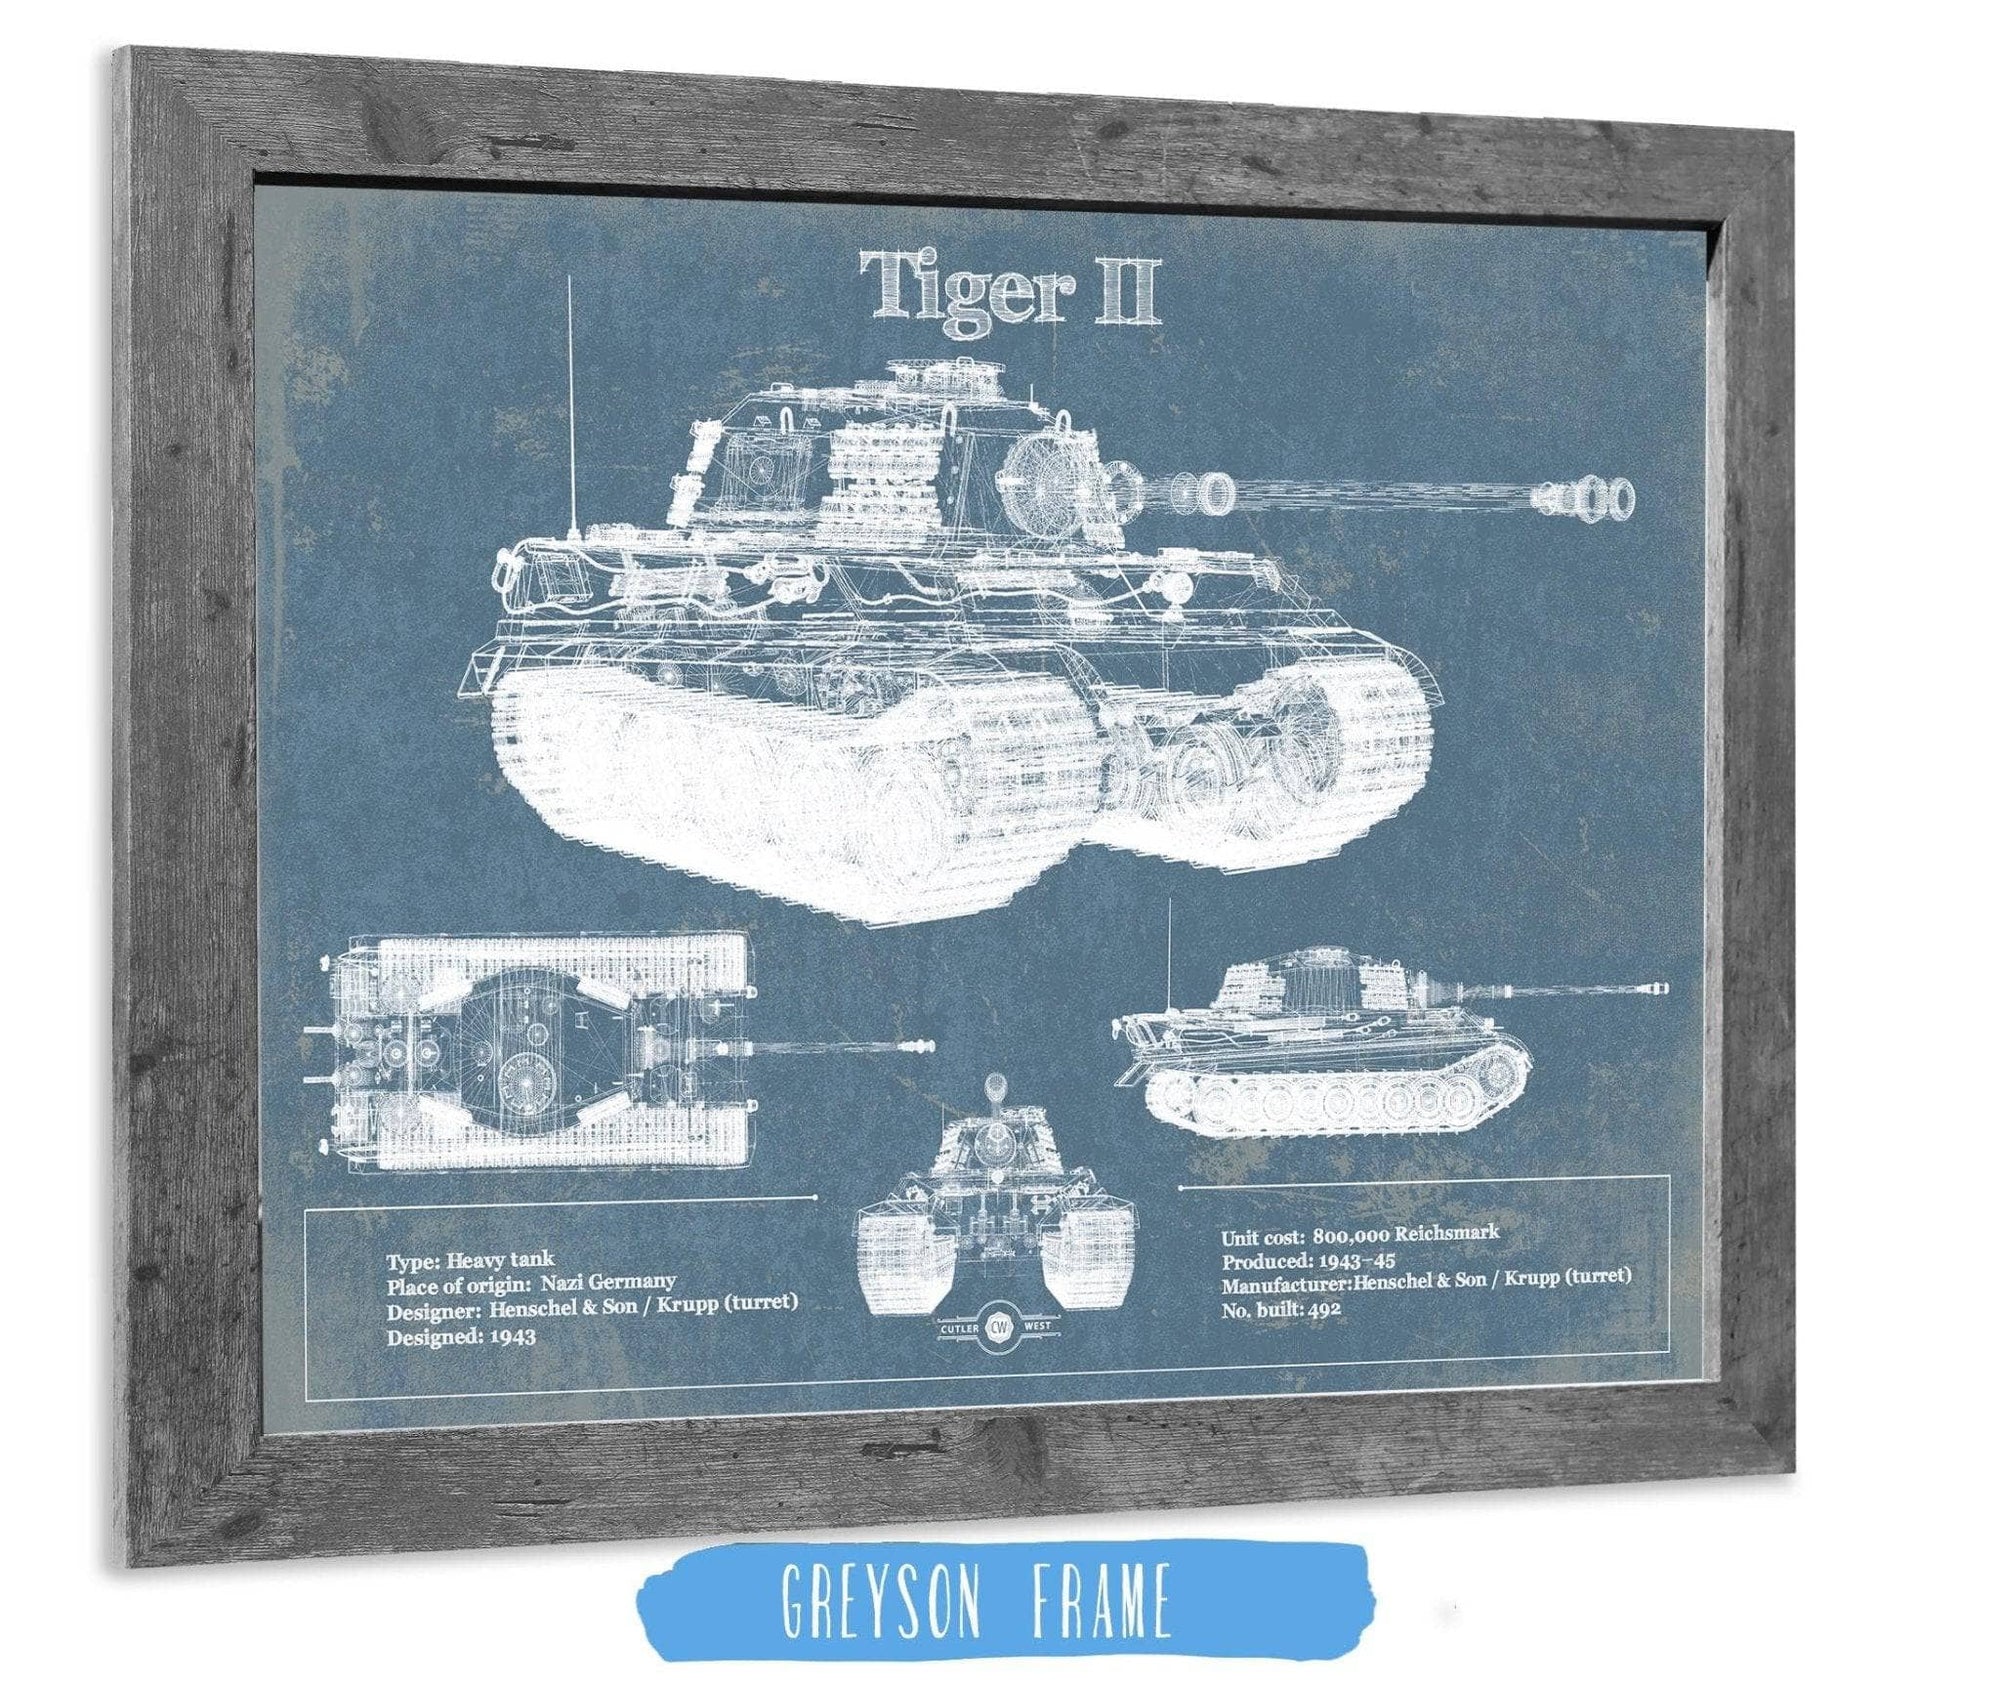 Cutler West Military Weapons Collection 14" x 11" / Greyson Frame Tiger II Vintage German Tank Military Print 845000232_24671